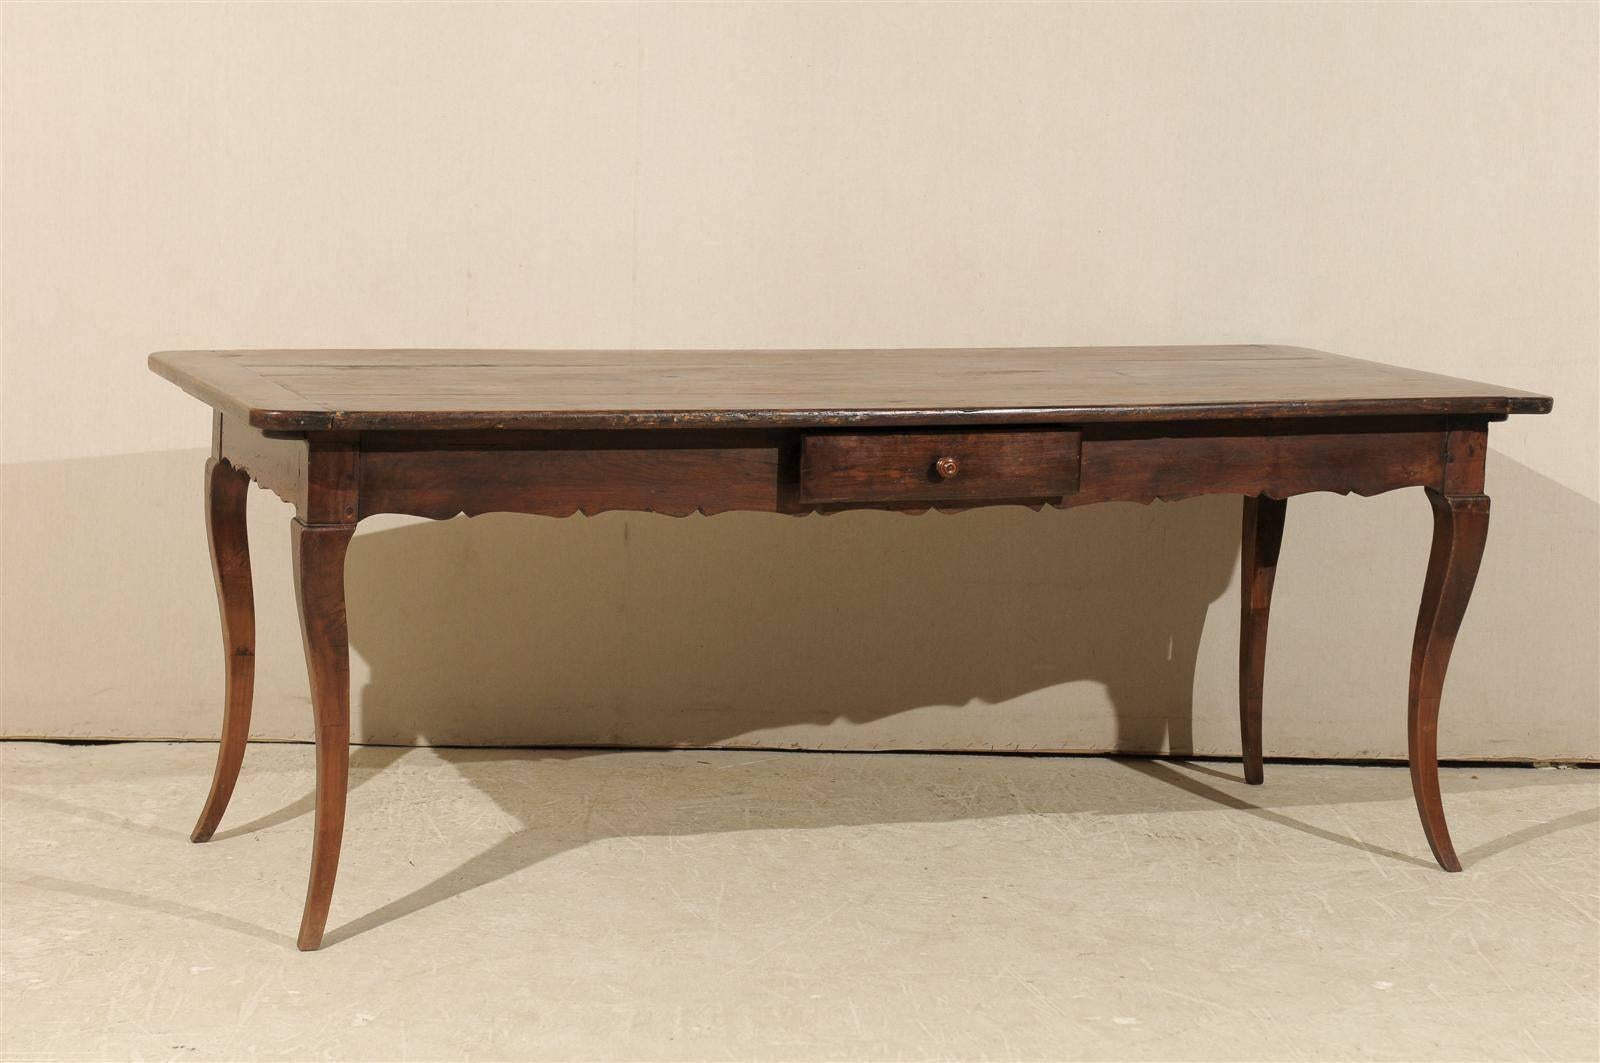 A French early 19th century fruitwood table/desk with single drawer, scalloped apron and cabriole legs.
     